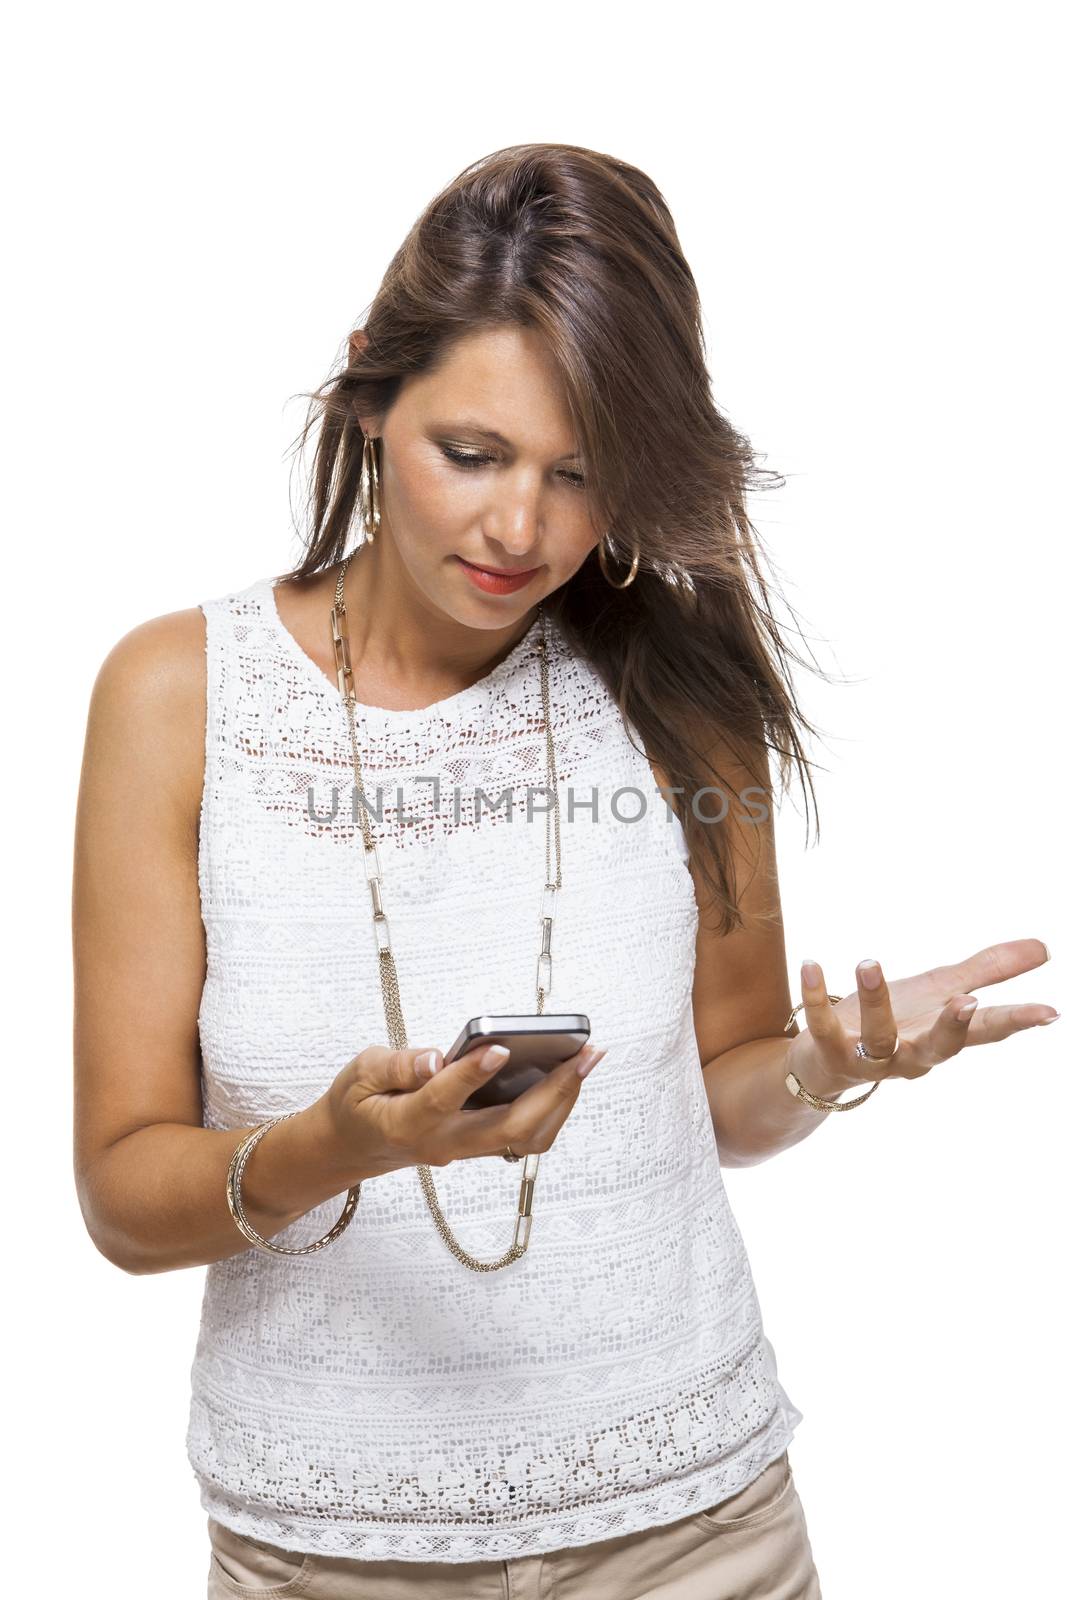 Vivacious woman reacting to a text message by juniart